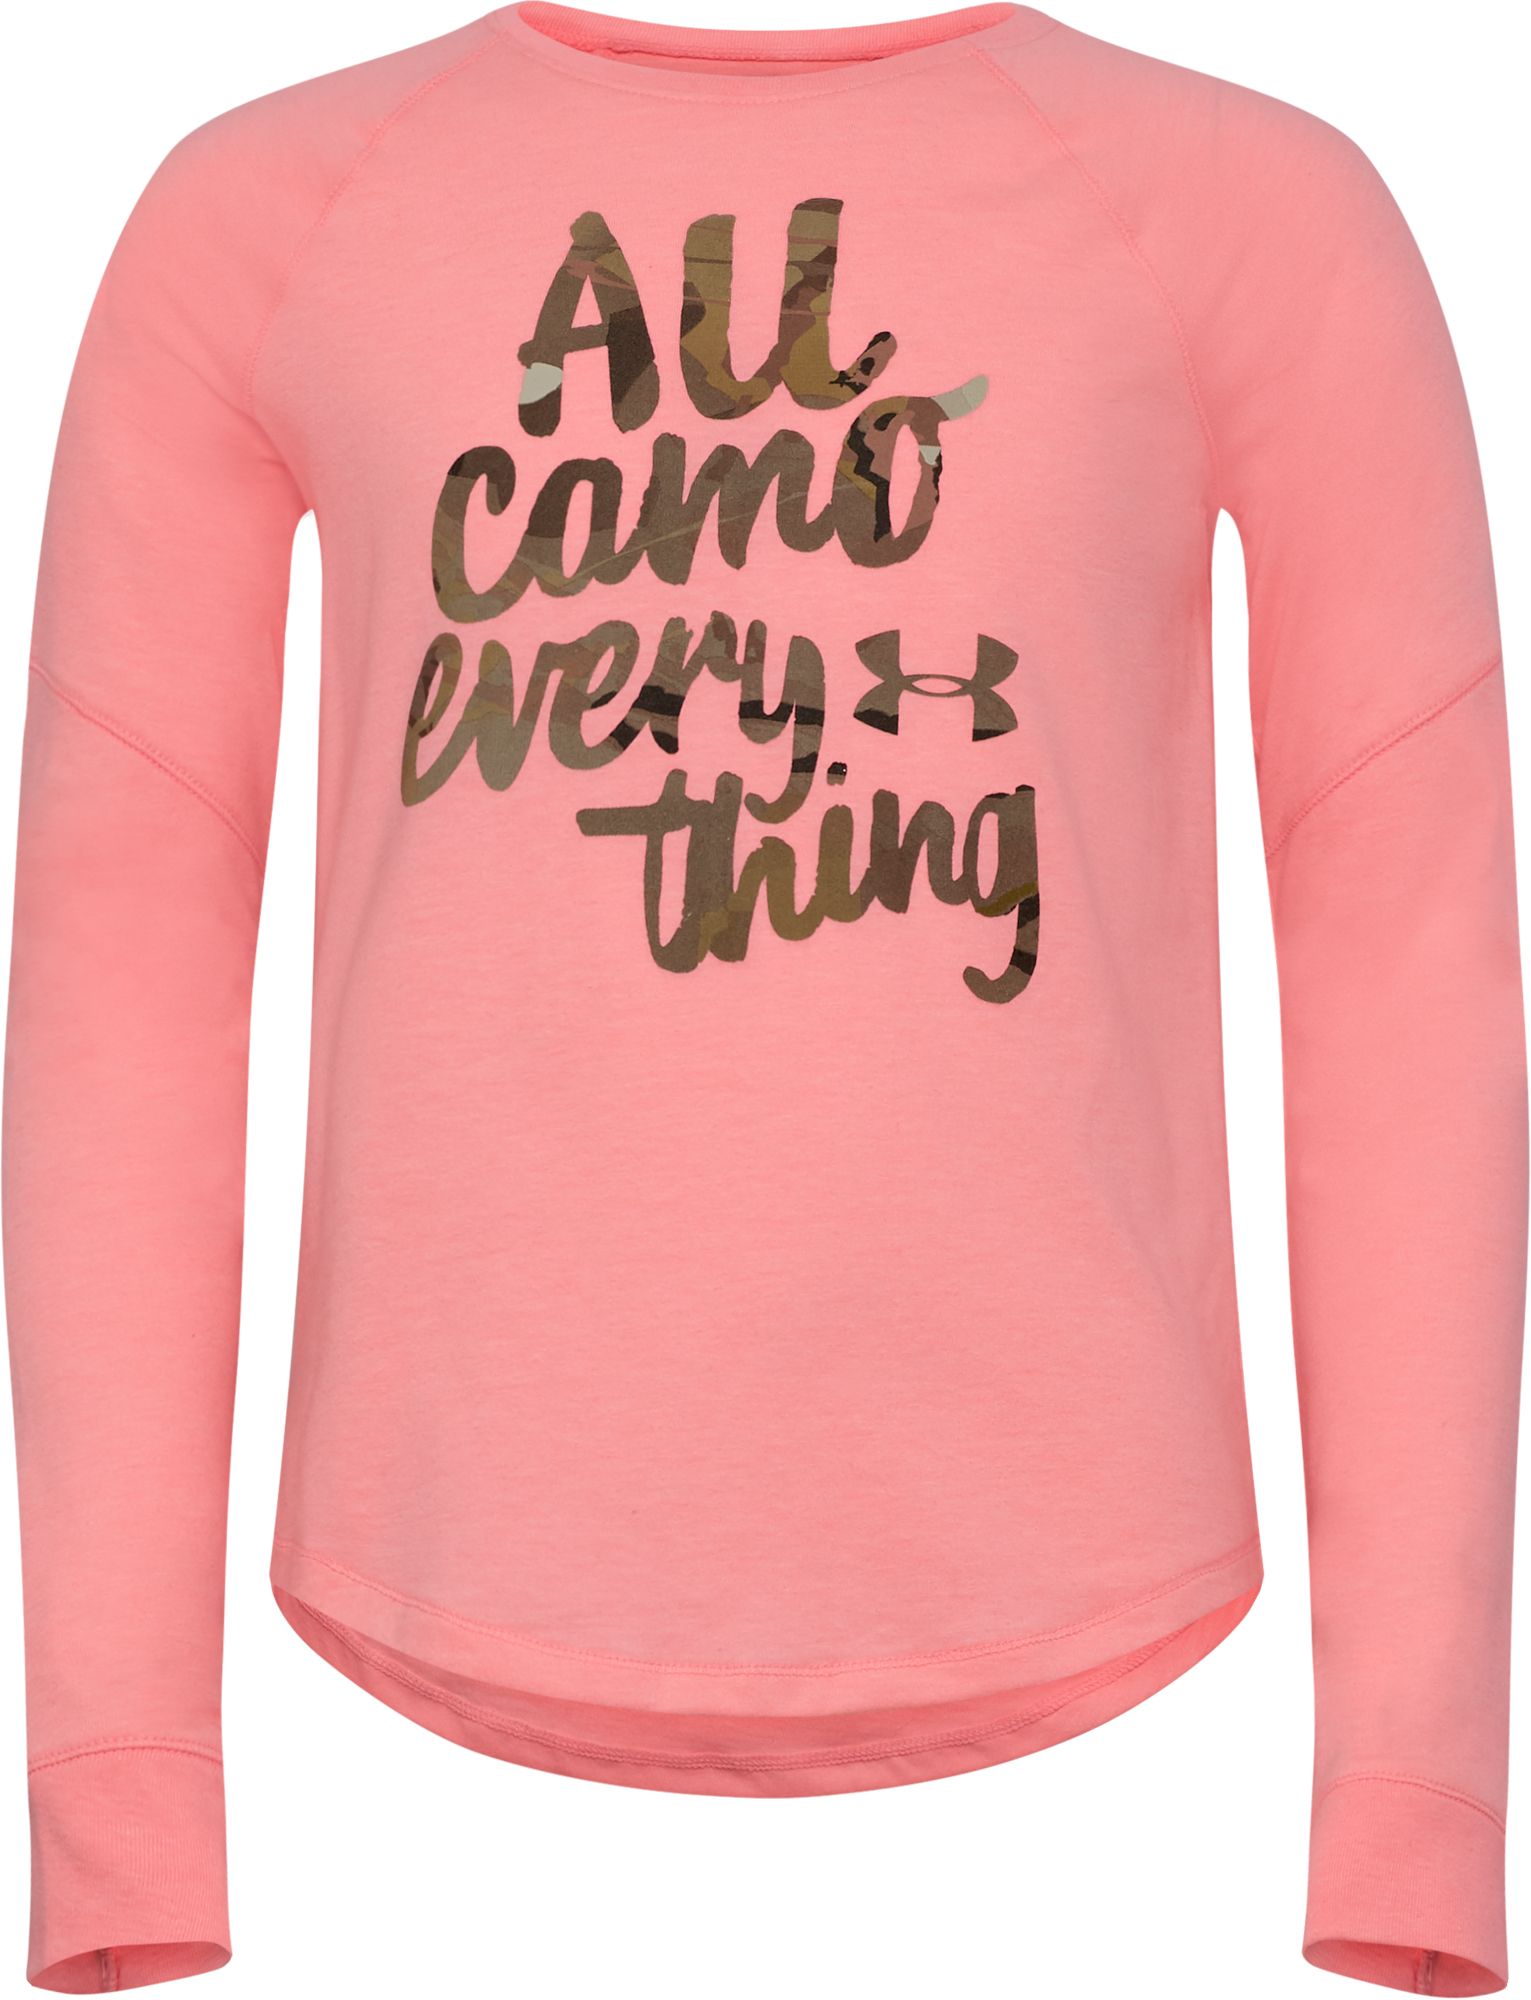 pink long sleeve under armour